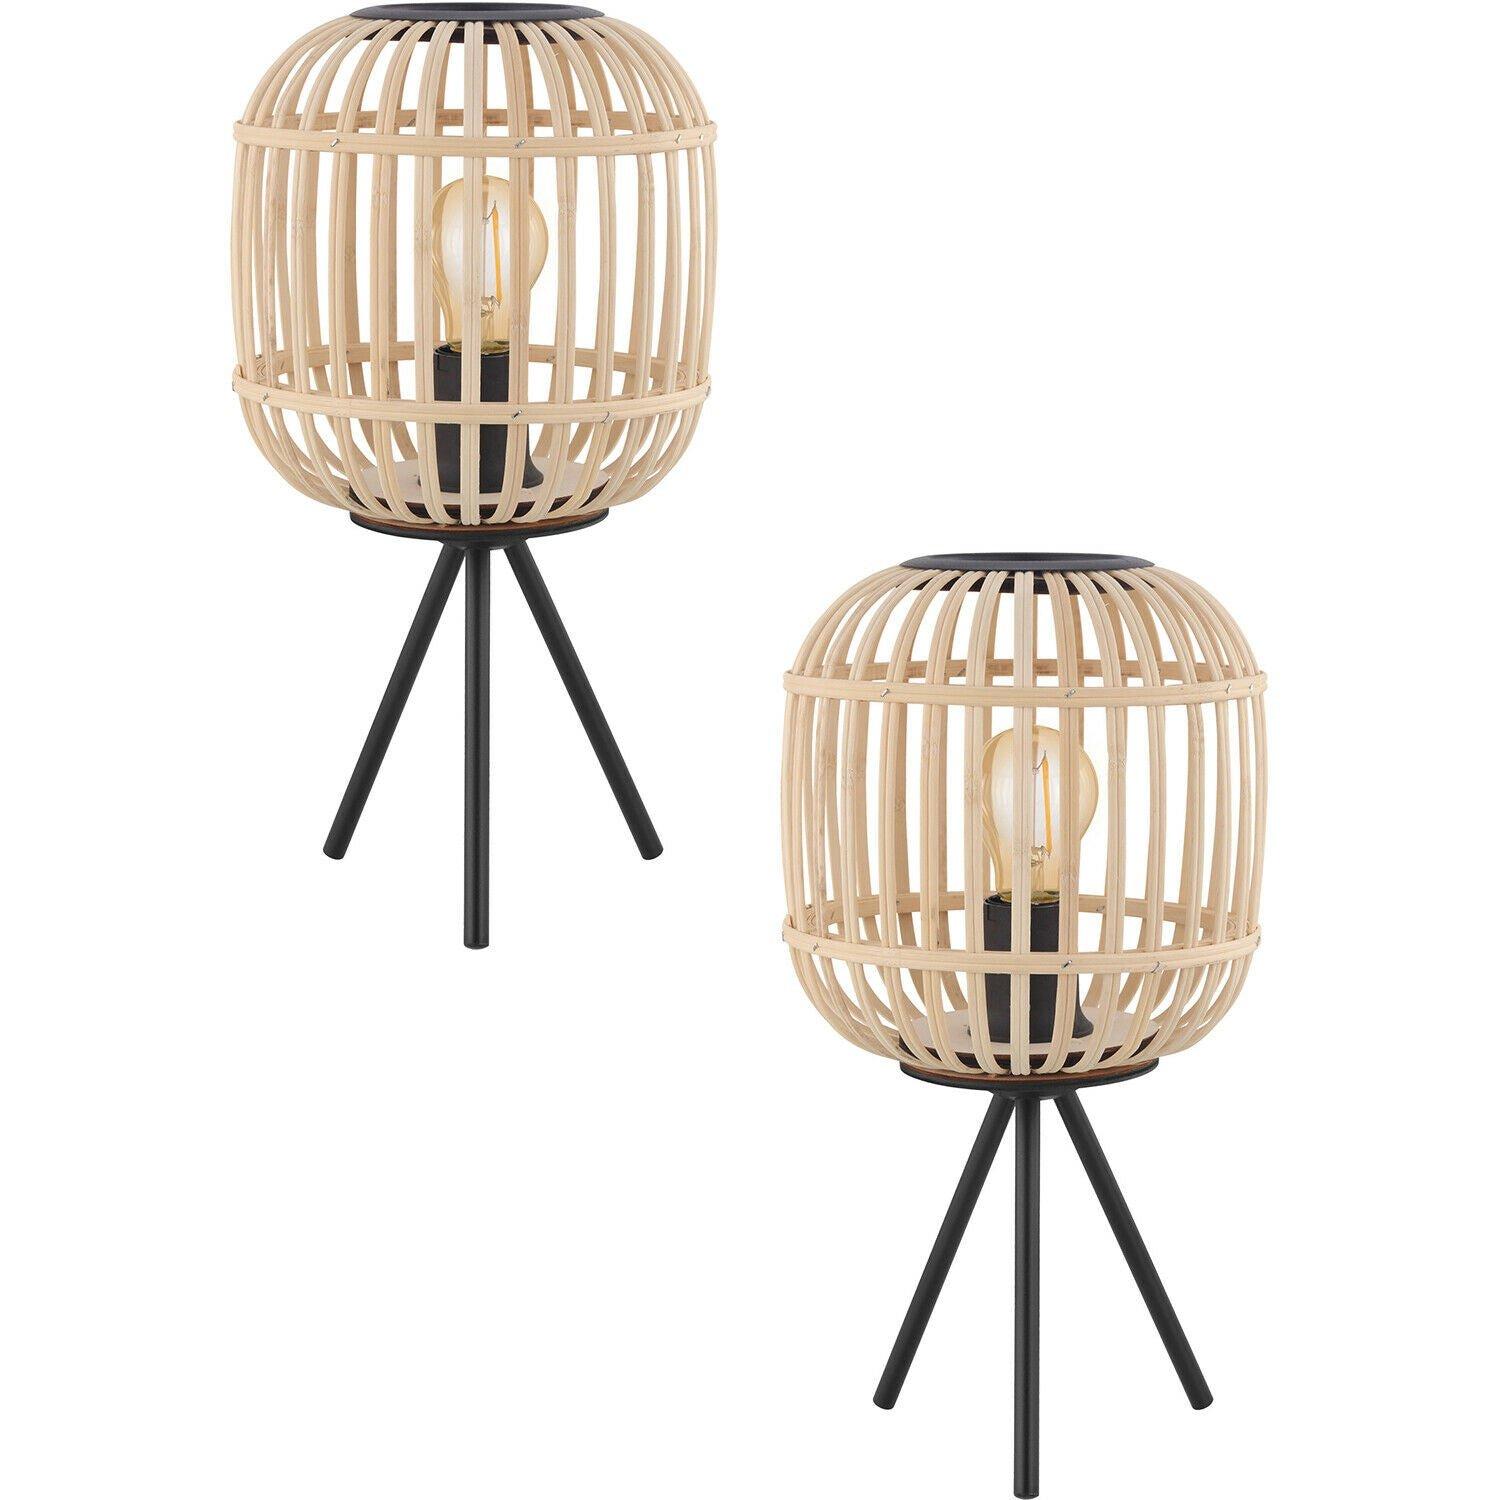 2 PACK Table Lamp Desk Light Black Tripod & Round Wood Cage Shade 1x 28W E27